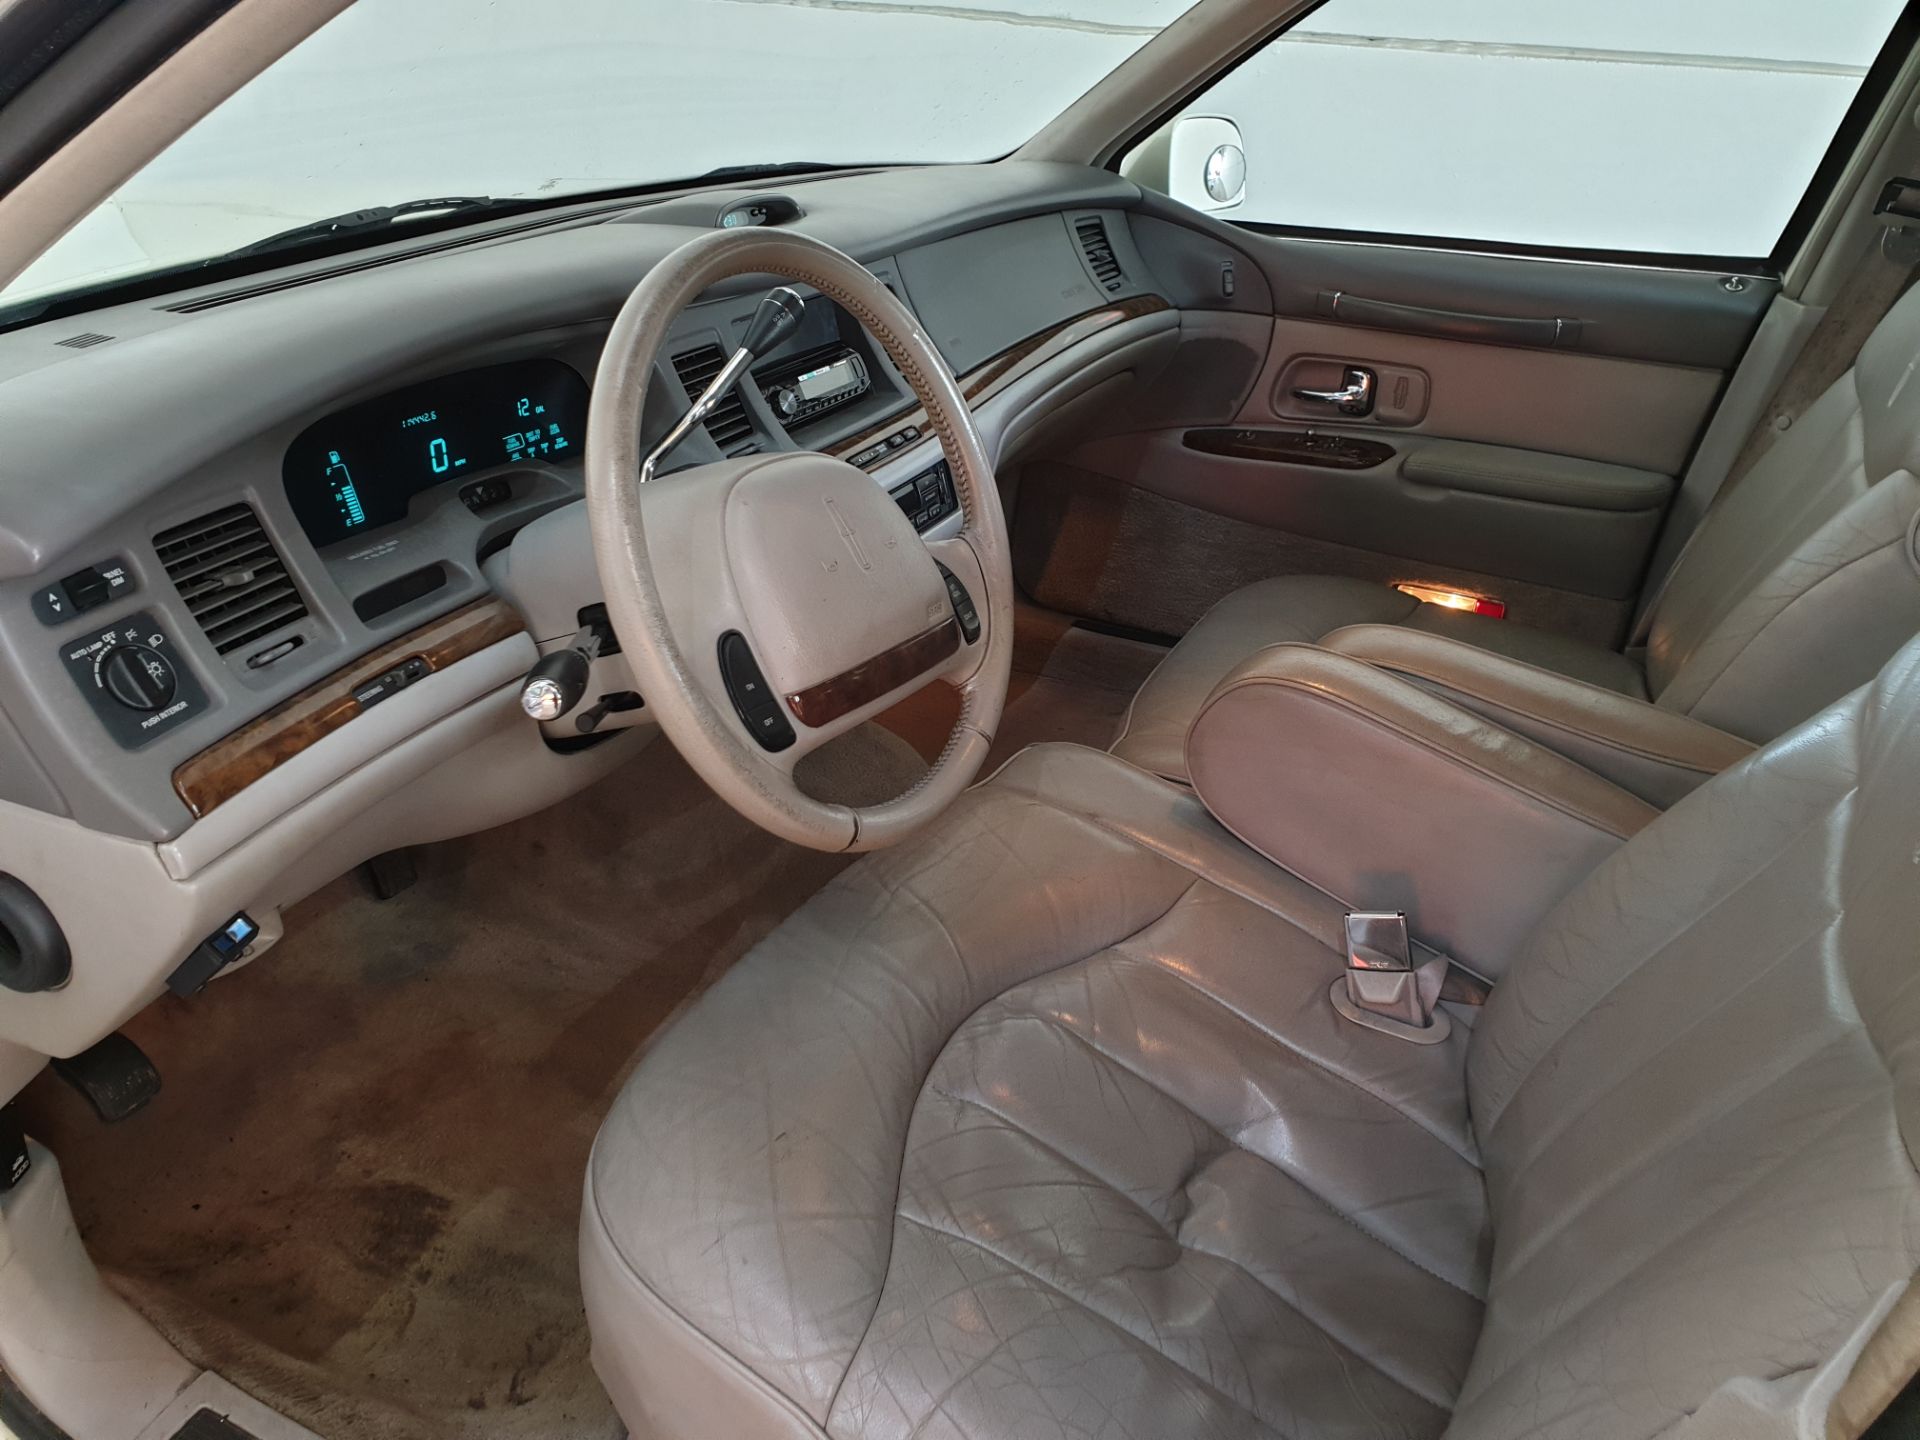 1999 Lincoln Town Car - Image 13 of 16